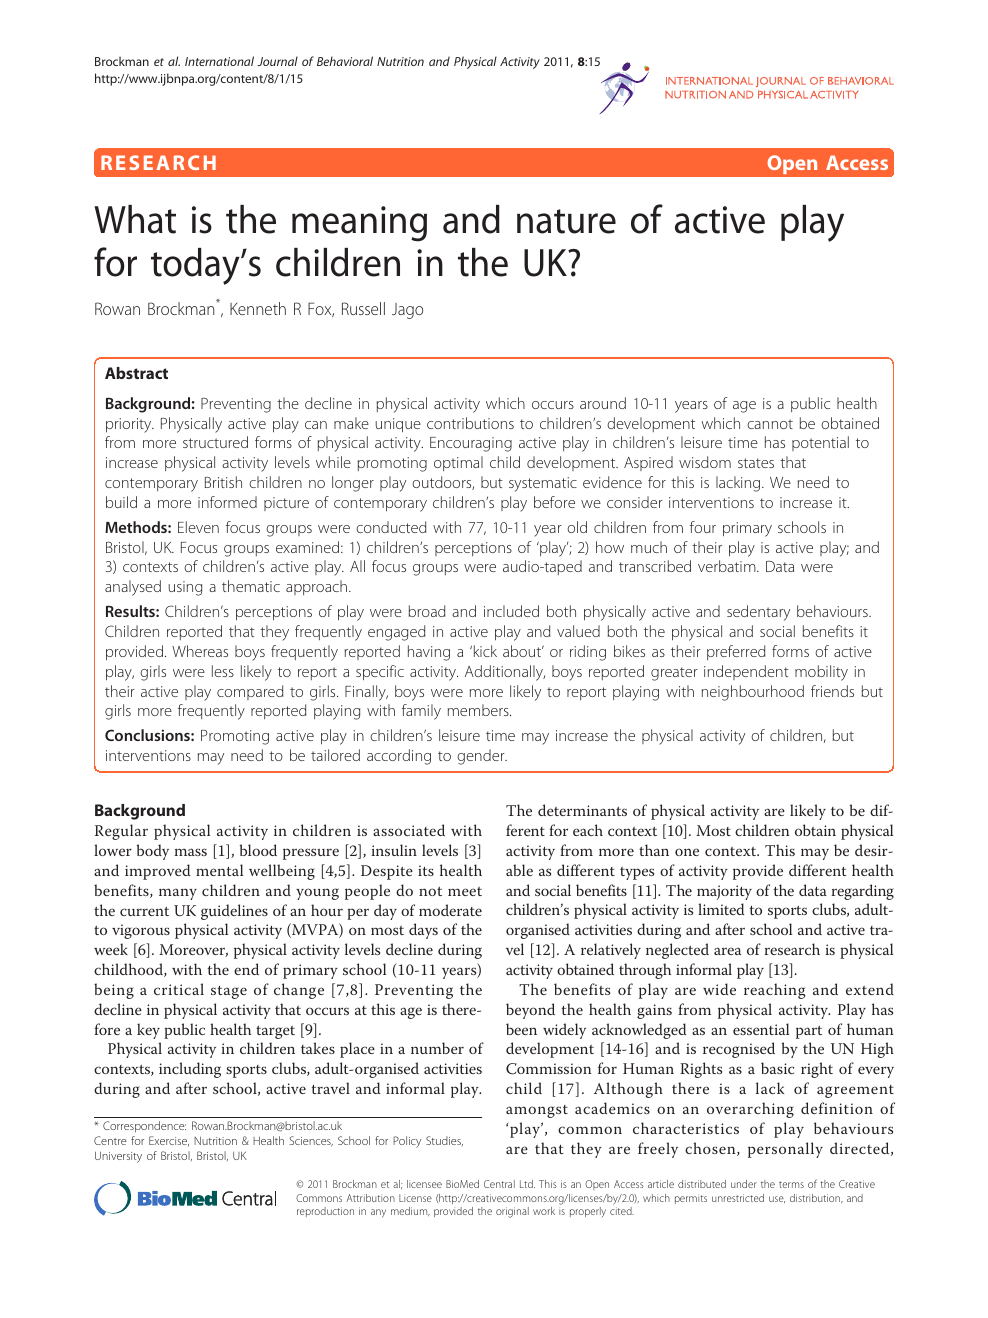 What Is The Meaning And Nature Of Active Play For Today S Children In The Uk Topic Of Research Paper In Health Sciences Download Scholarly Article Pdf And Read For Free On